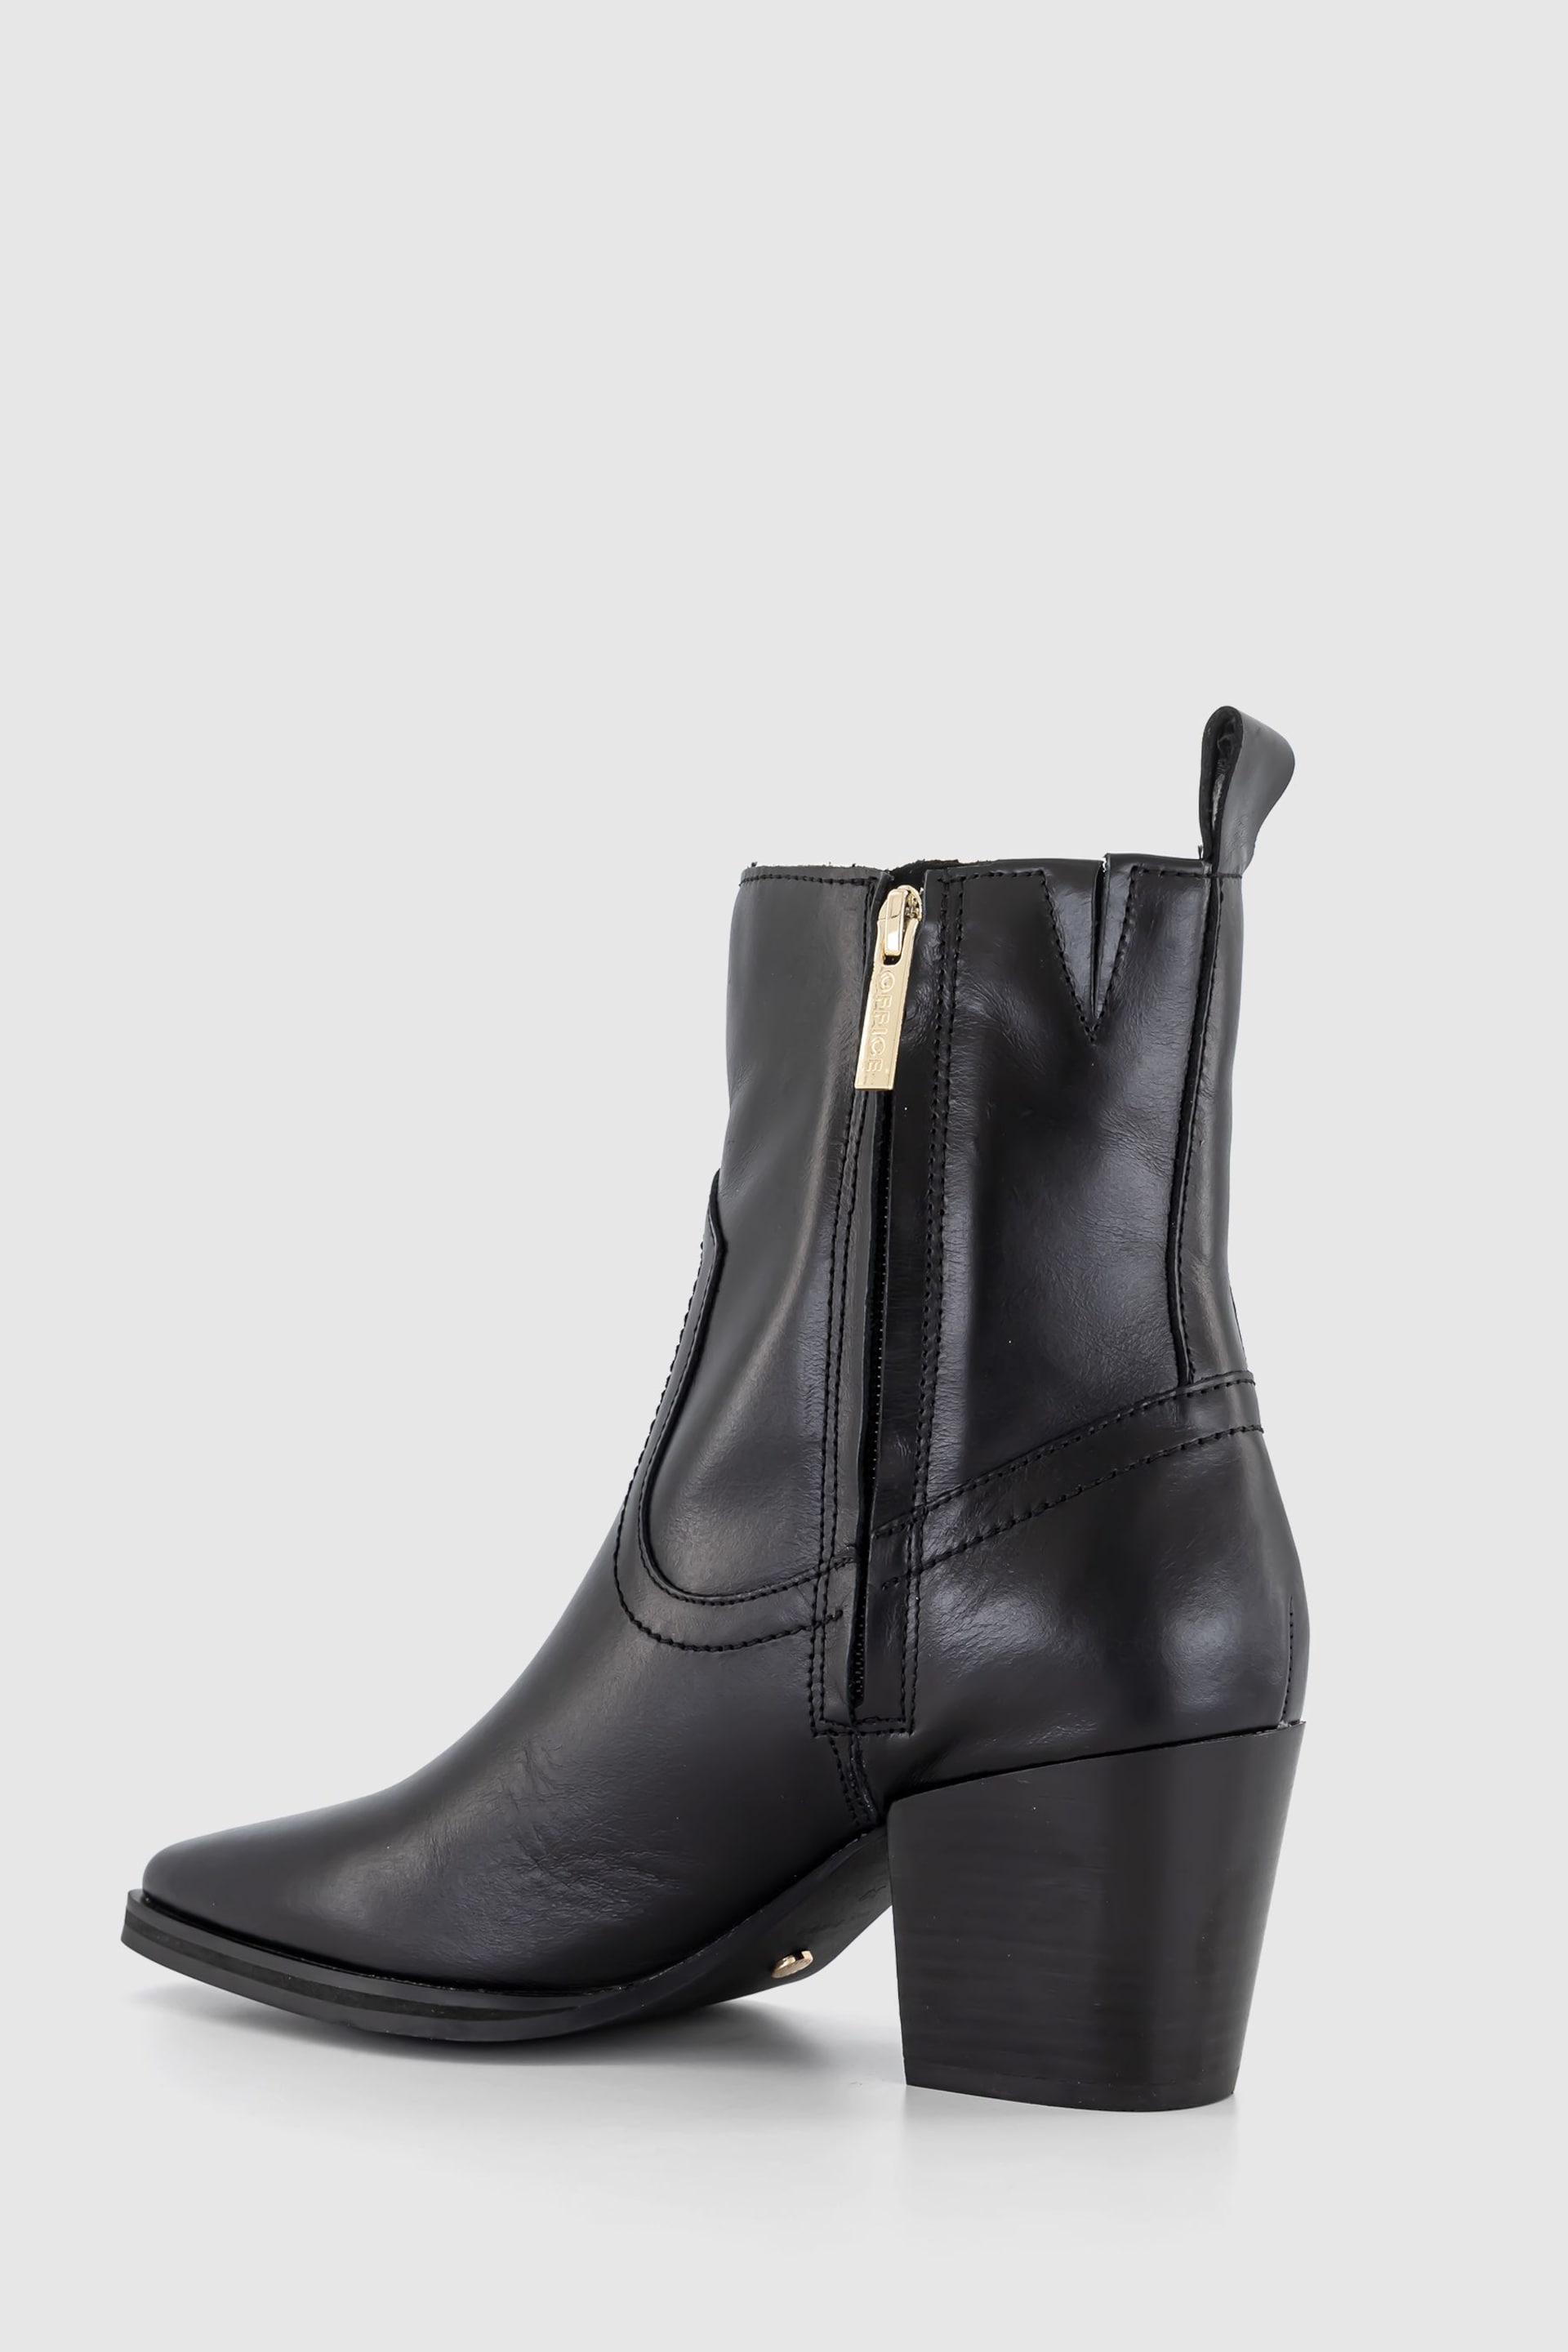 Office Black Leather Western Ankle Boots - Image 3 of 4